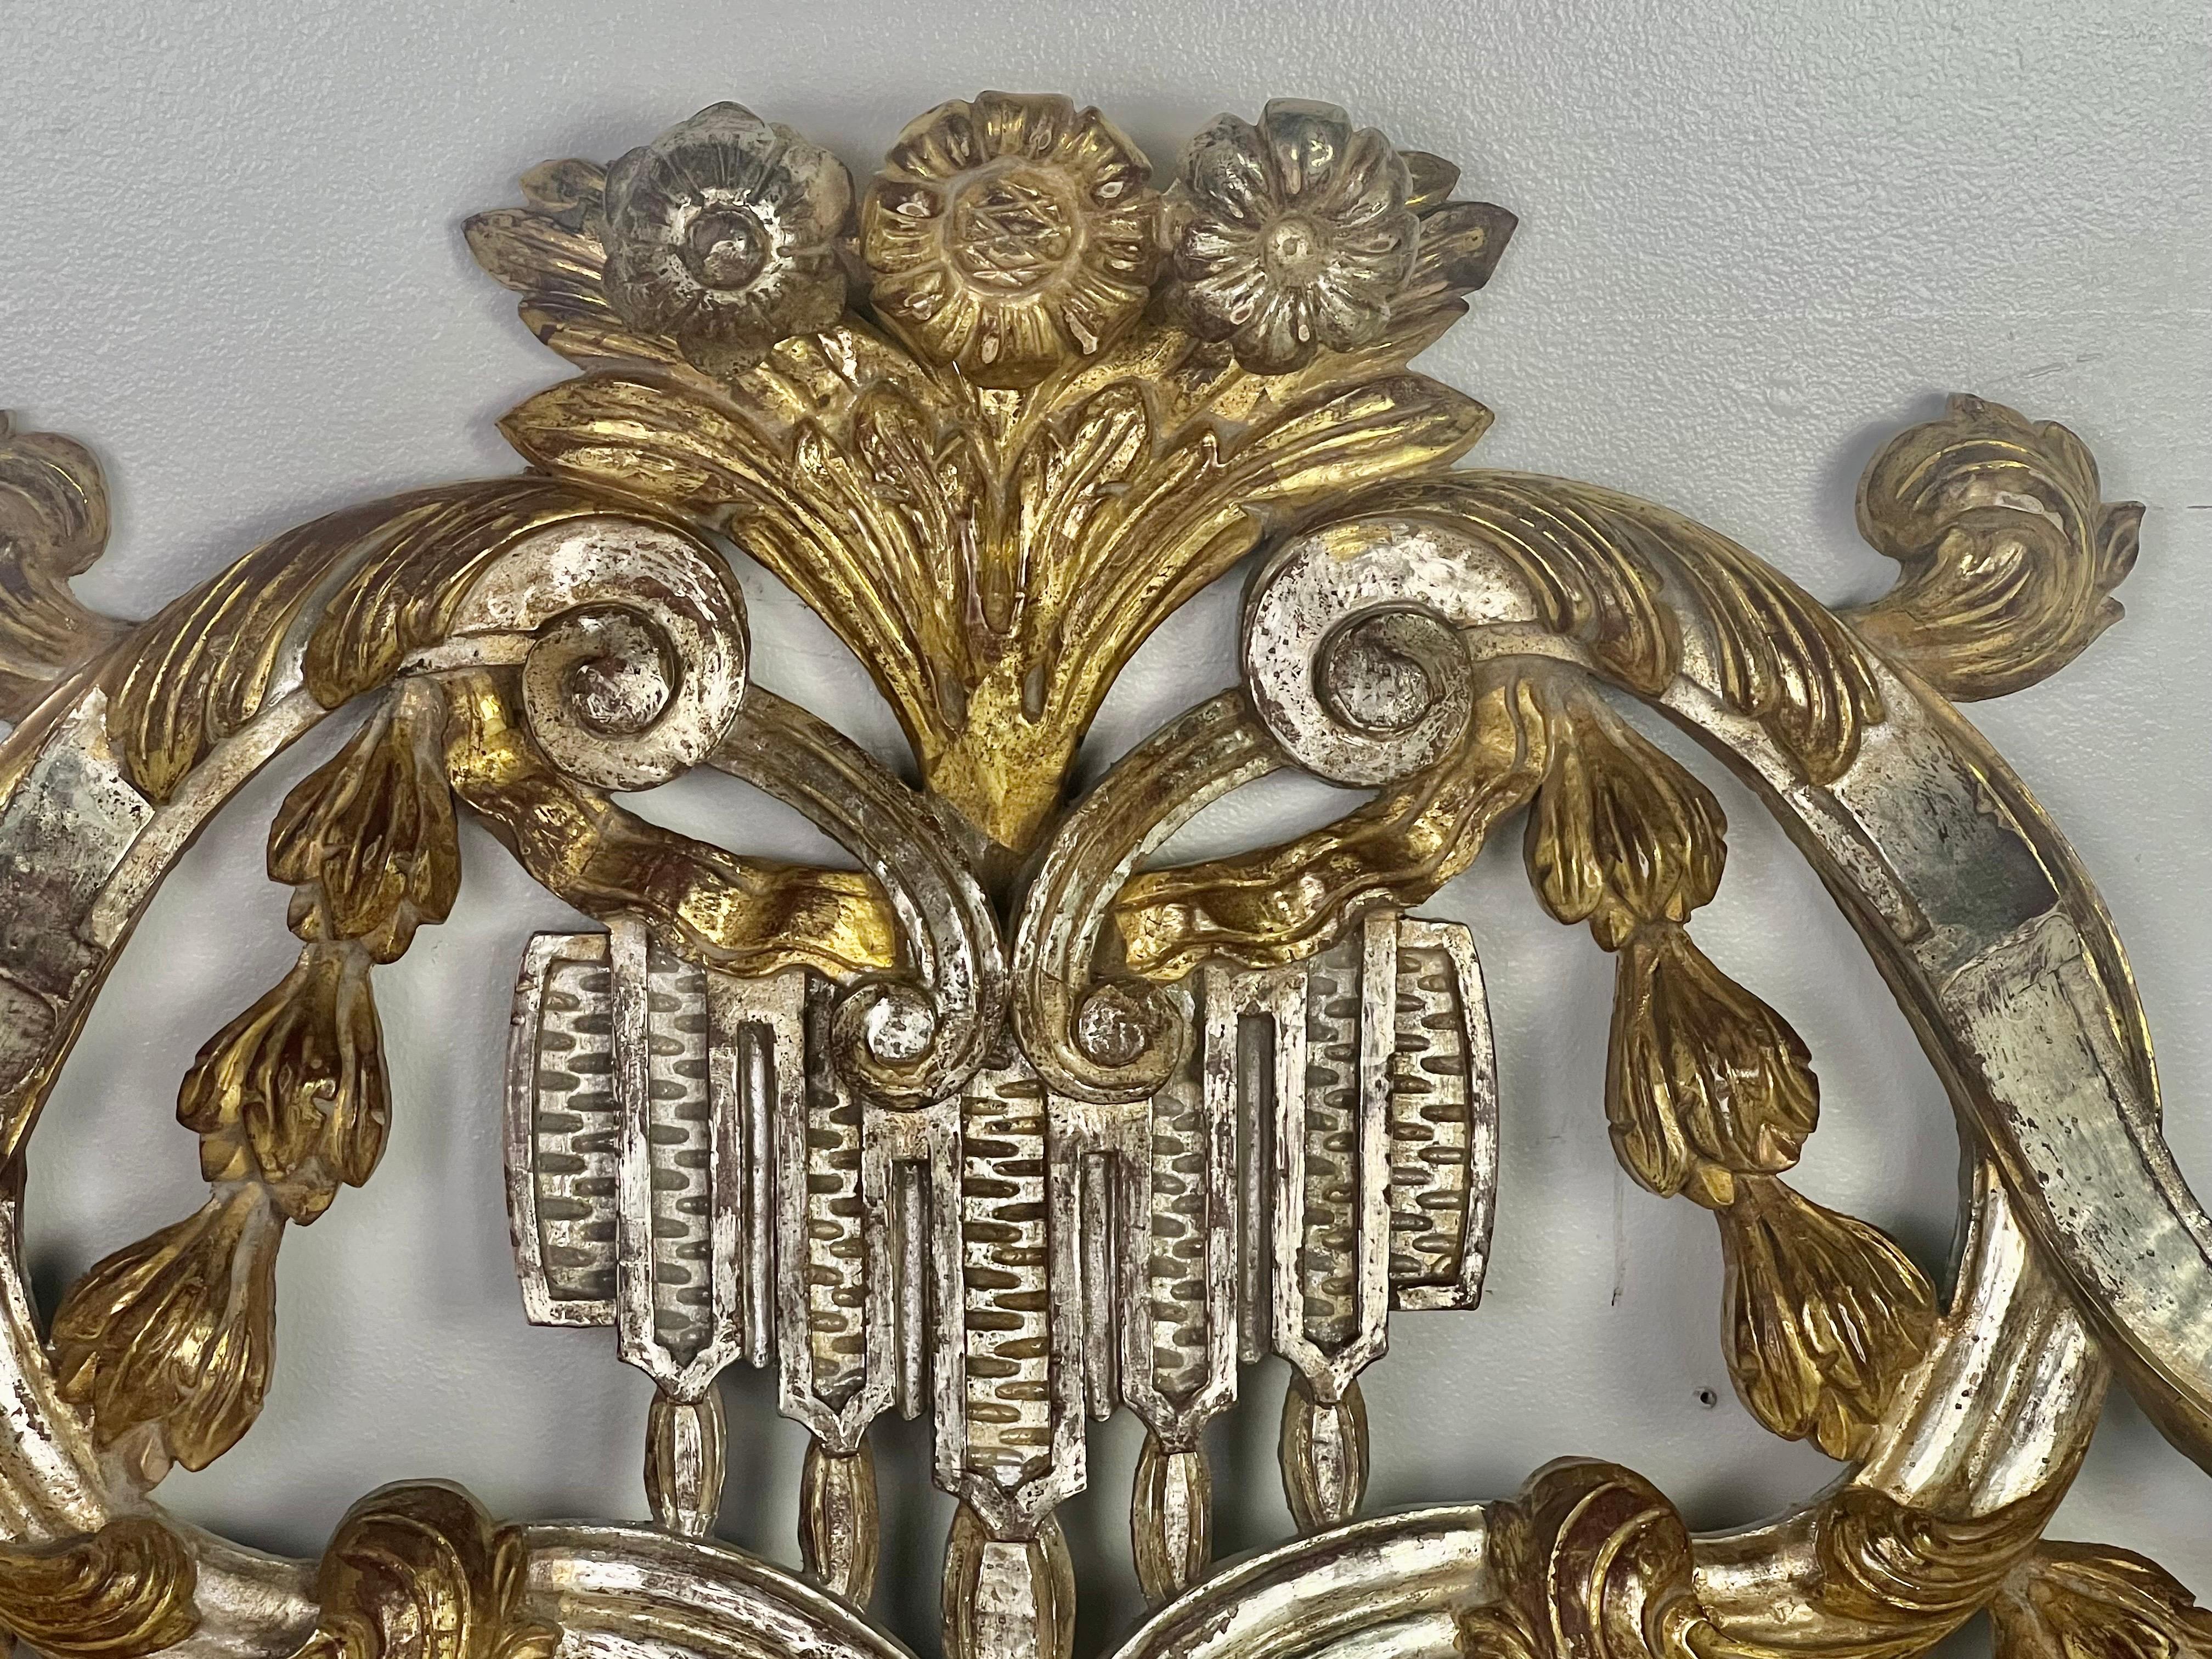 Rococo Silver and Gold Giltwood Carving w/ Scrolls and Acanthus Leaves C. 1900